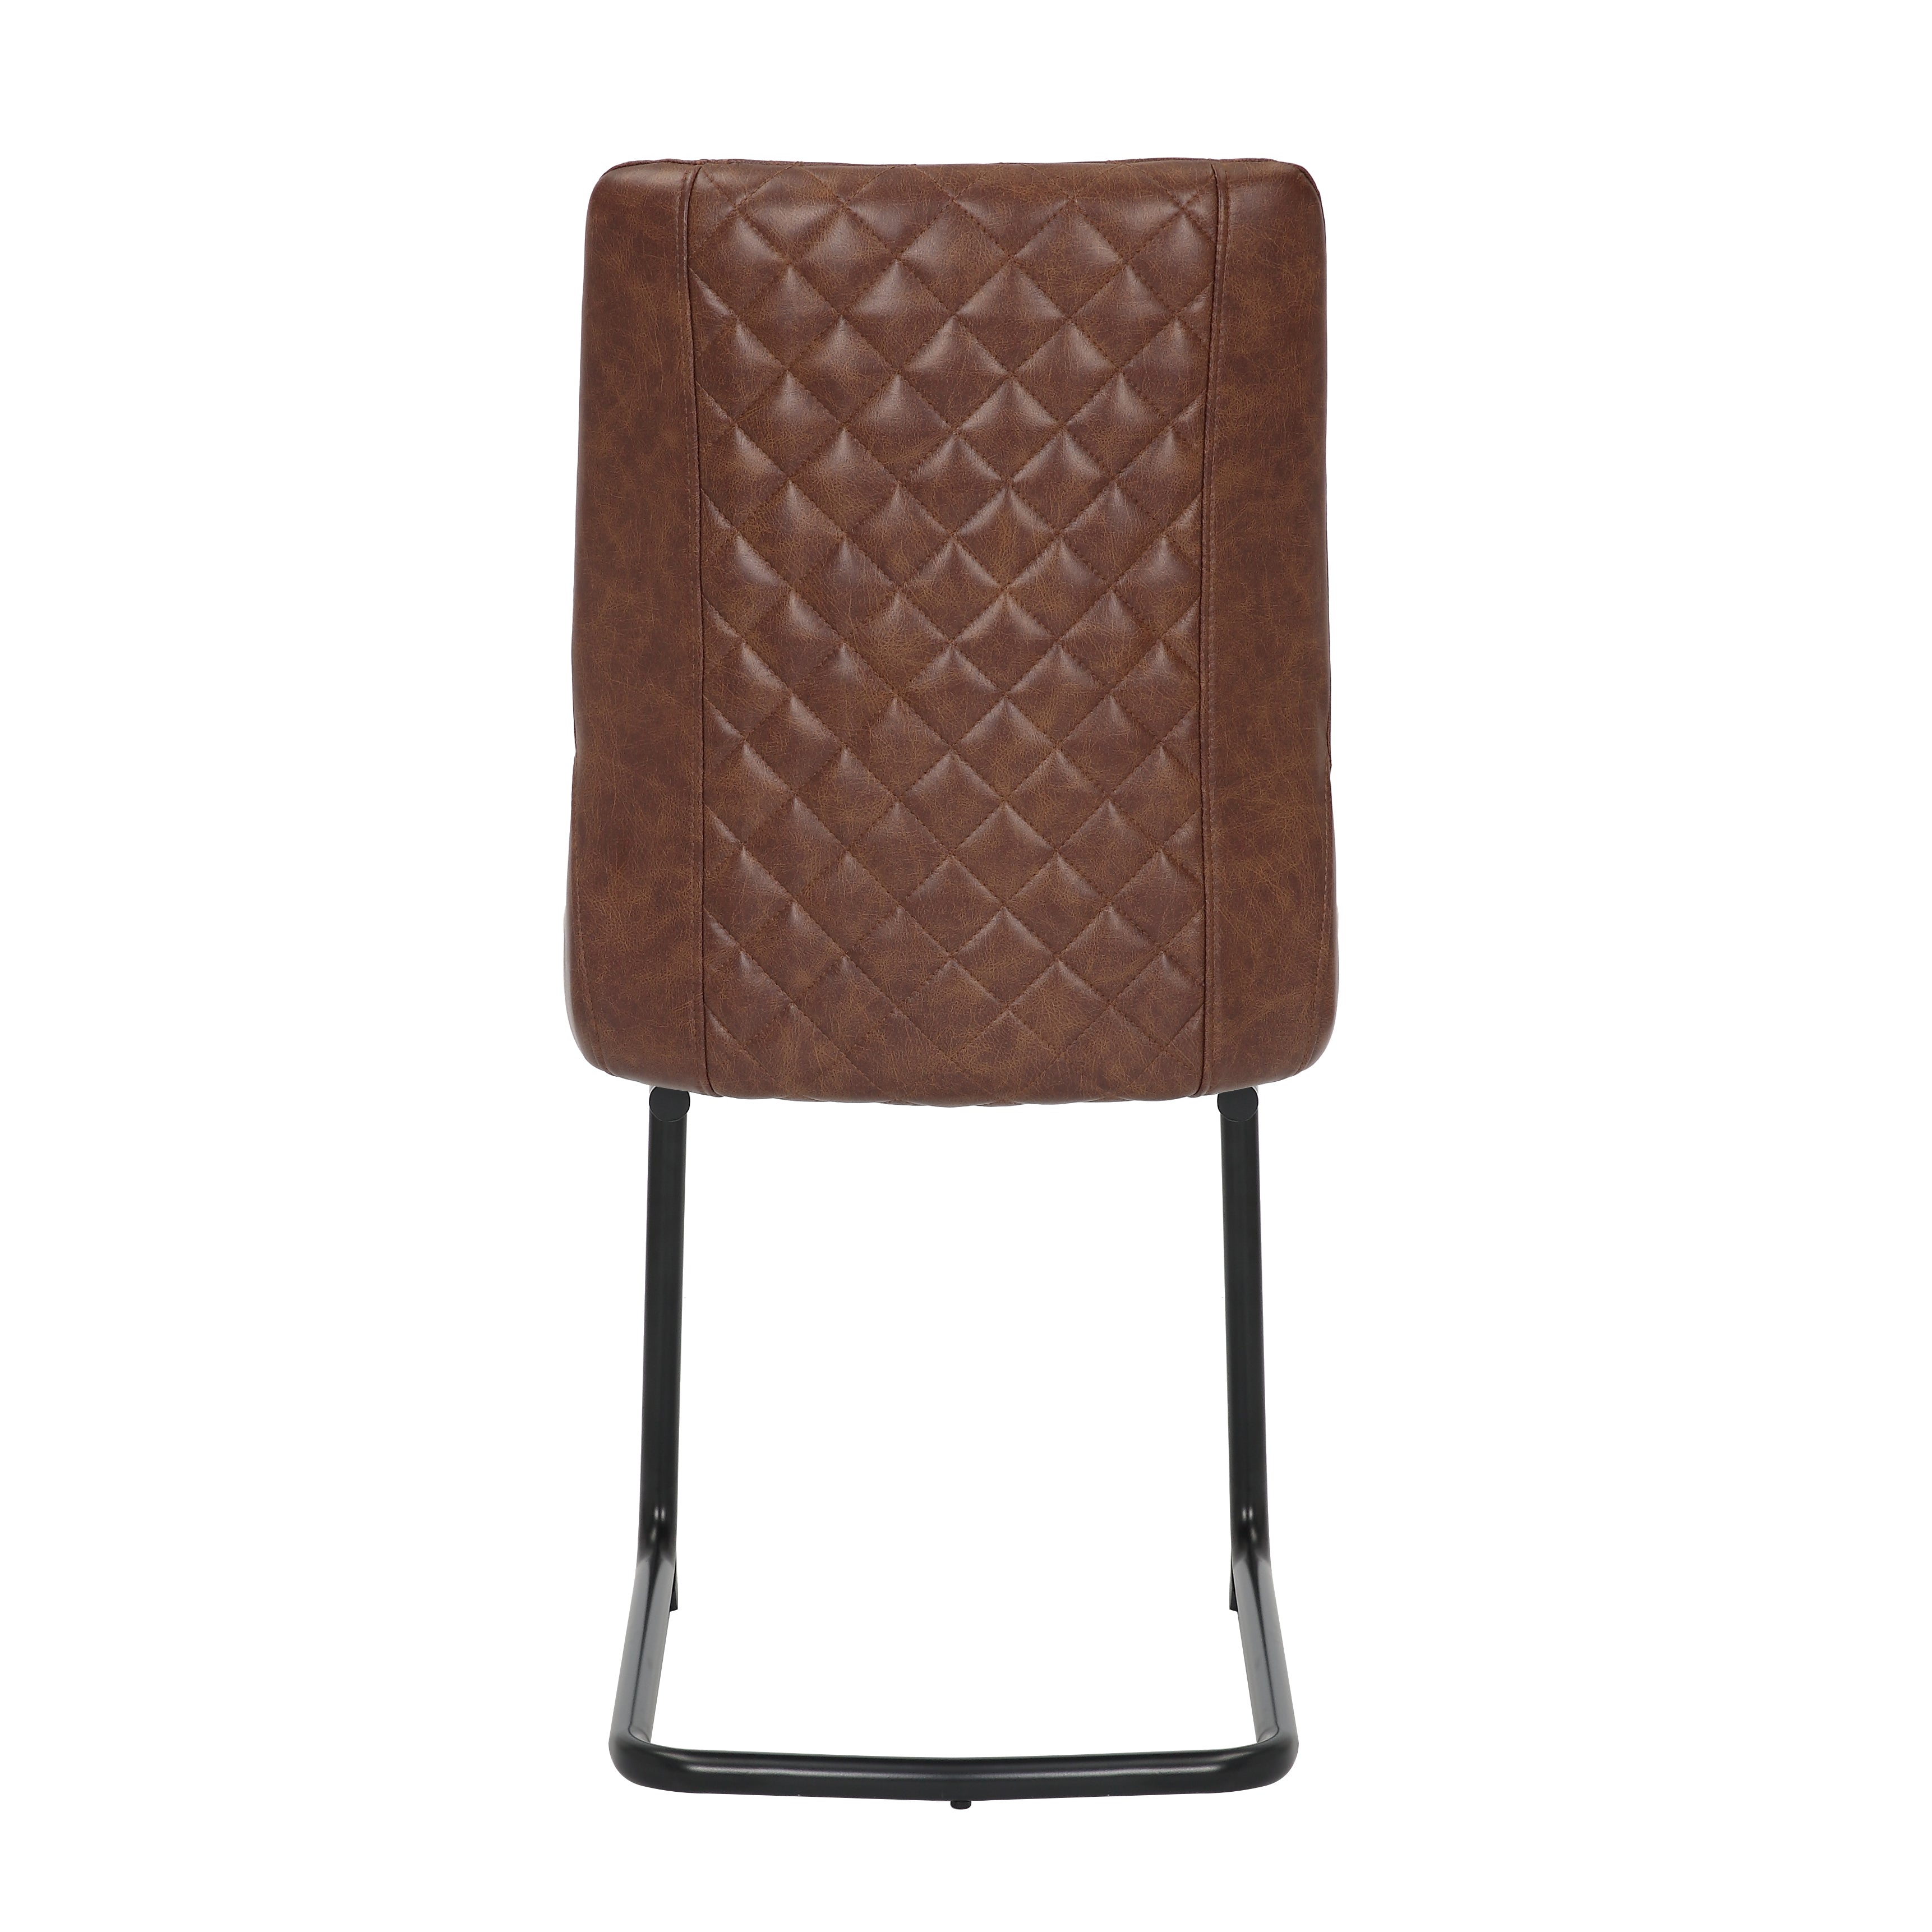 Boston Cantilever Dining Chair Faux Leather